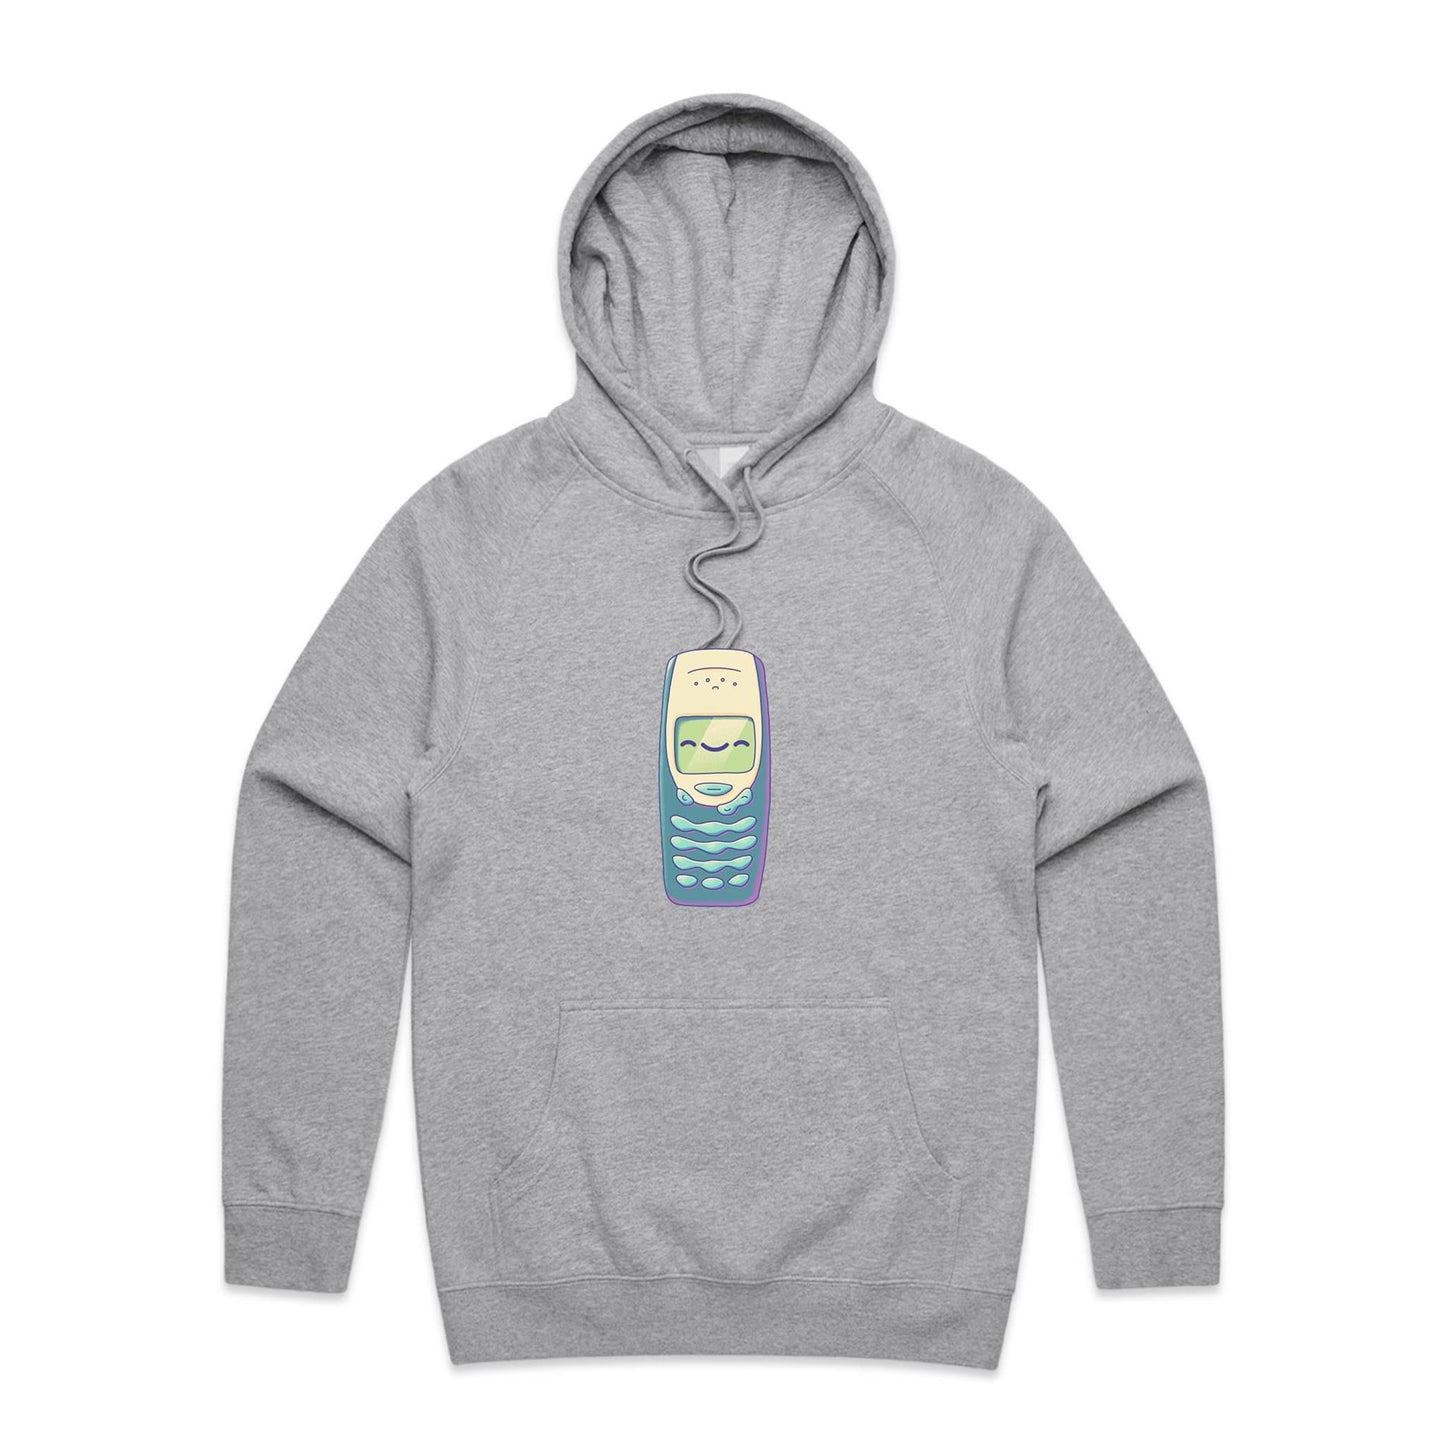 A Hard Cell - Unisex Hoodie